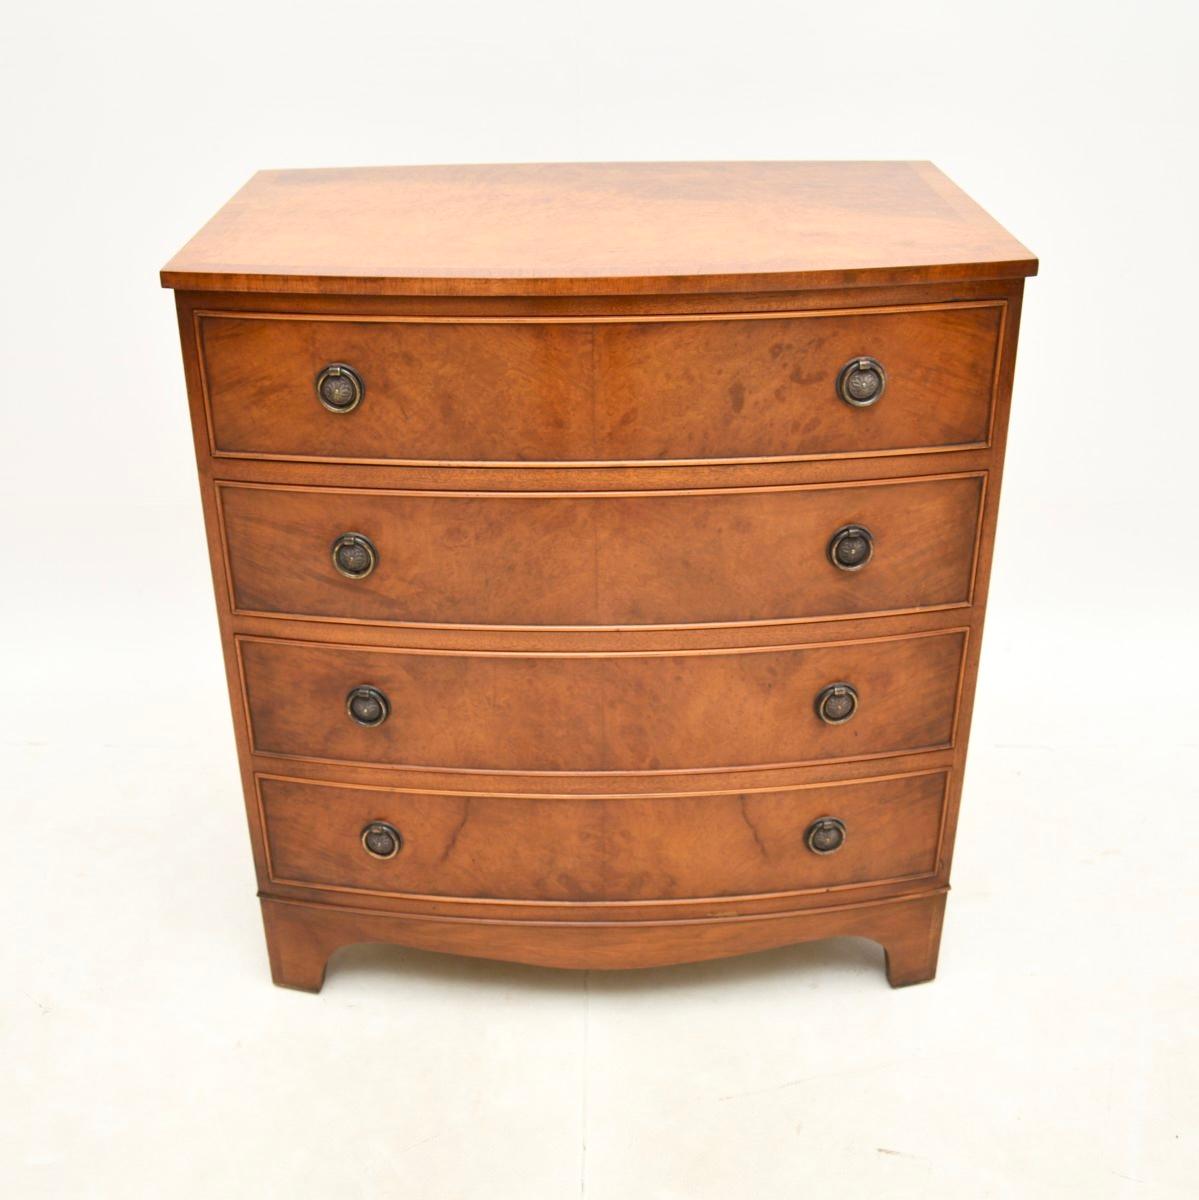 A charming antique Georgian style burr walnut chest of drawers. This was made in England, it dates from around the 1950’s.

The quality is fantastic, this is a useful size with lots of storage space. It has a bow fronted shape, sits on bracket feet